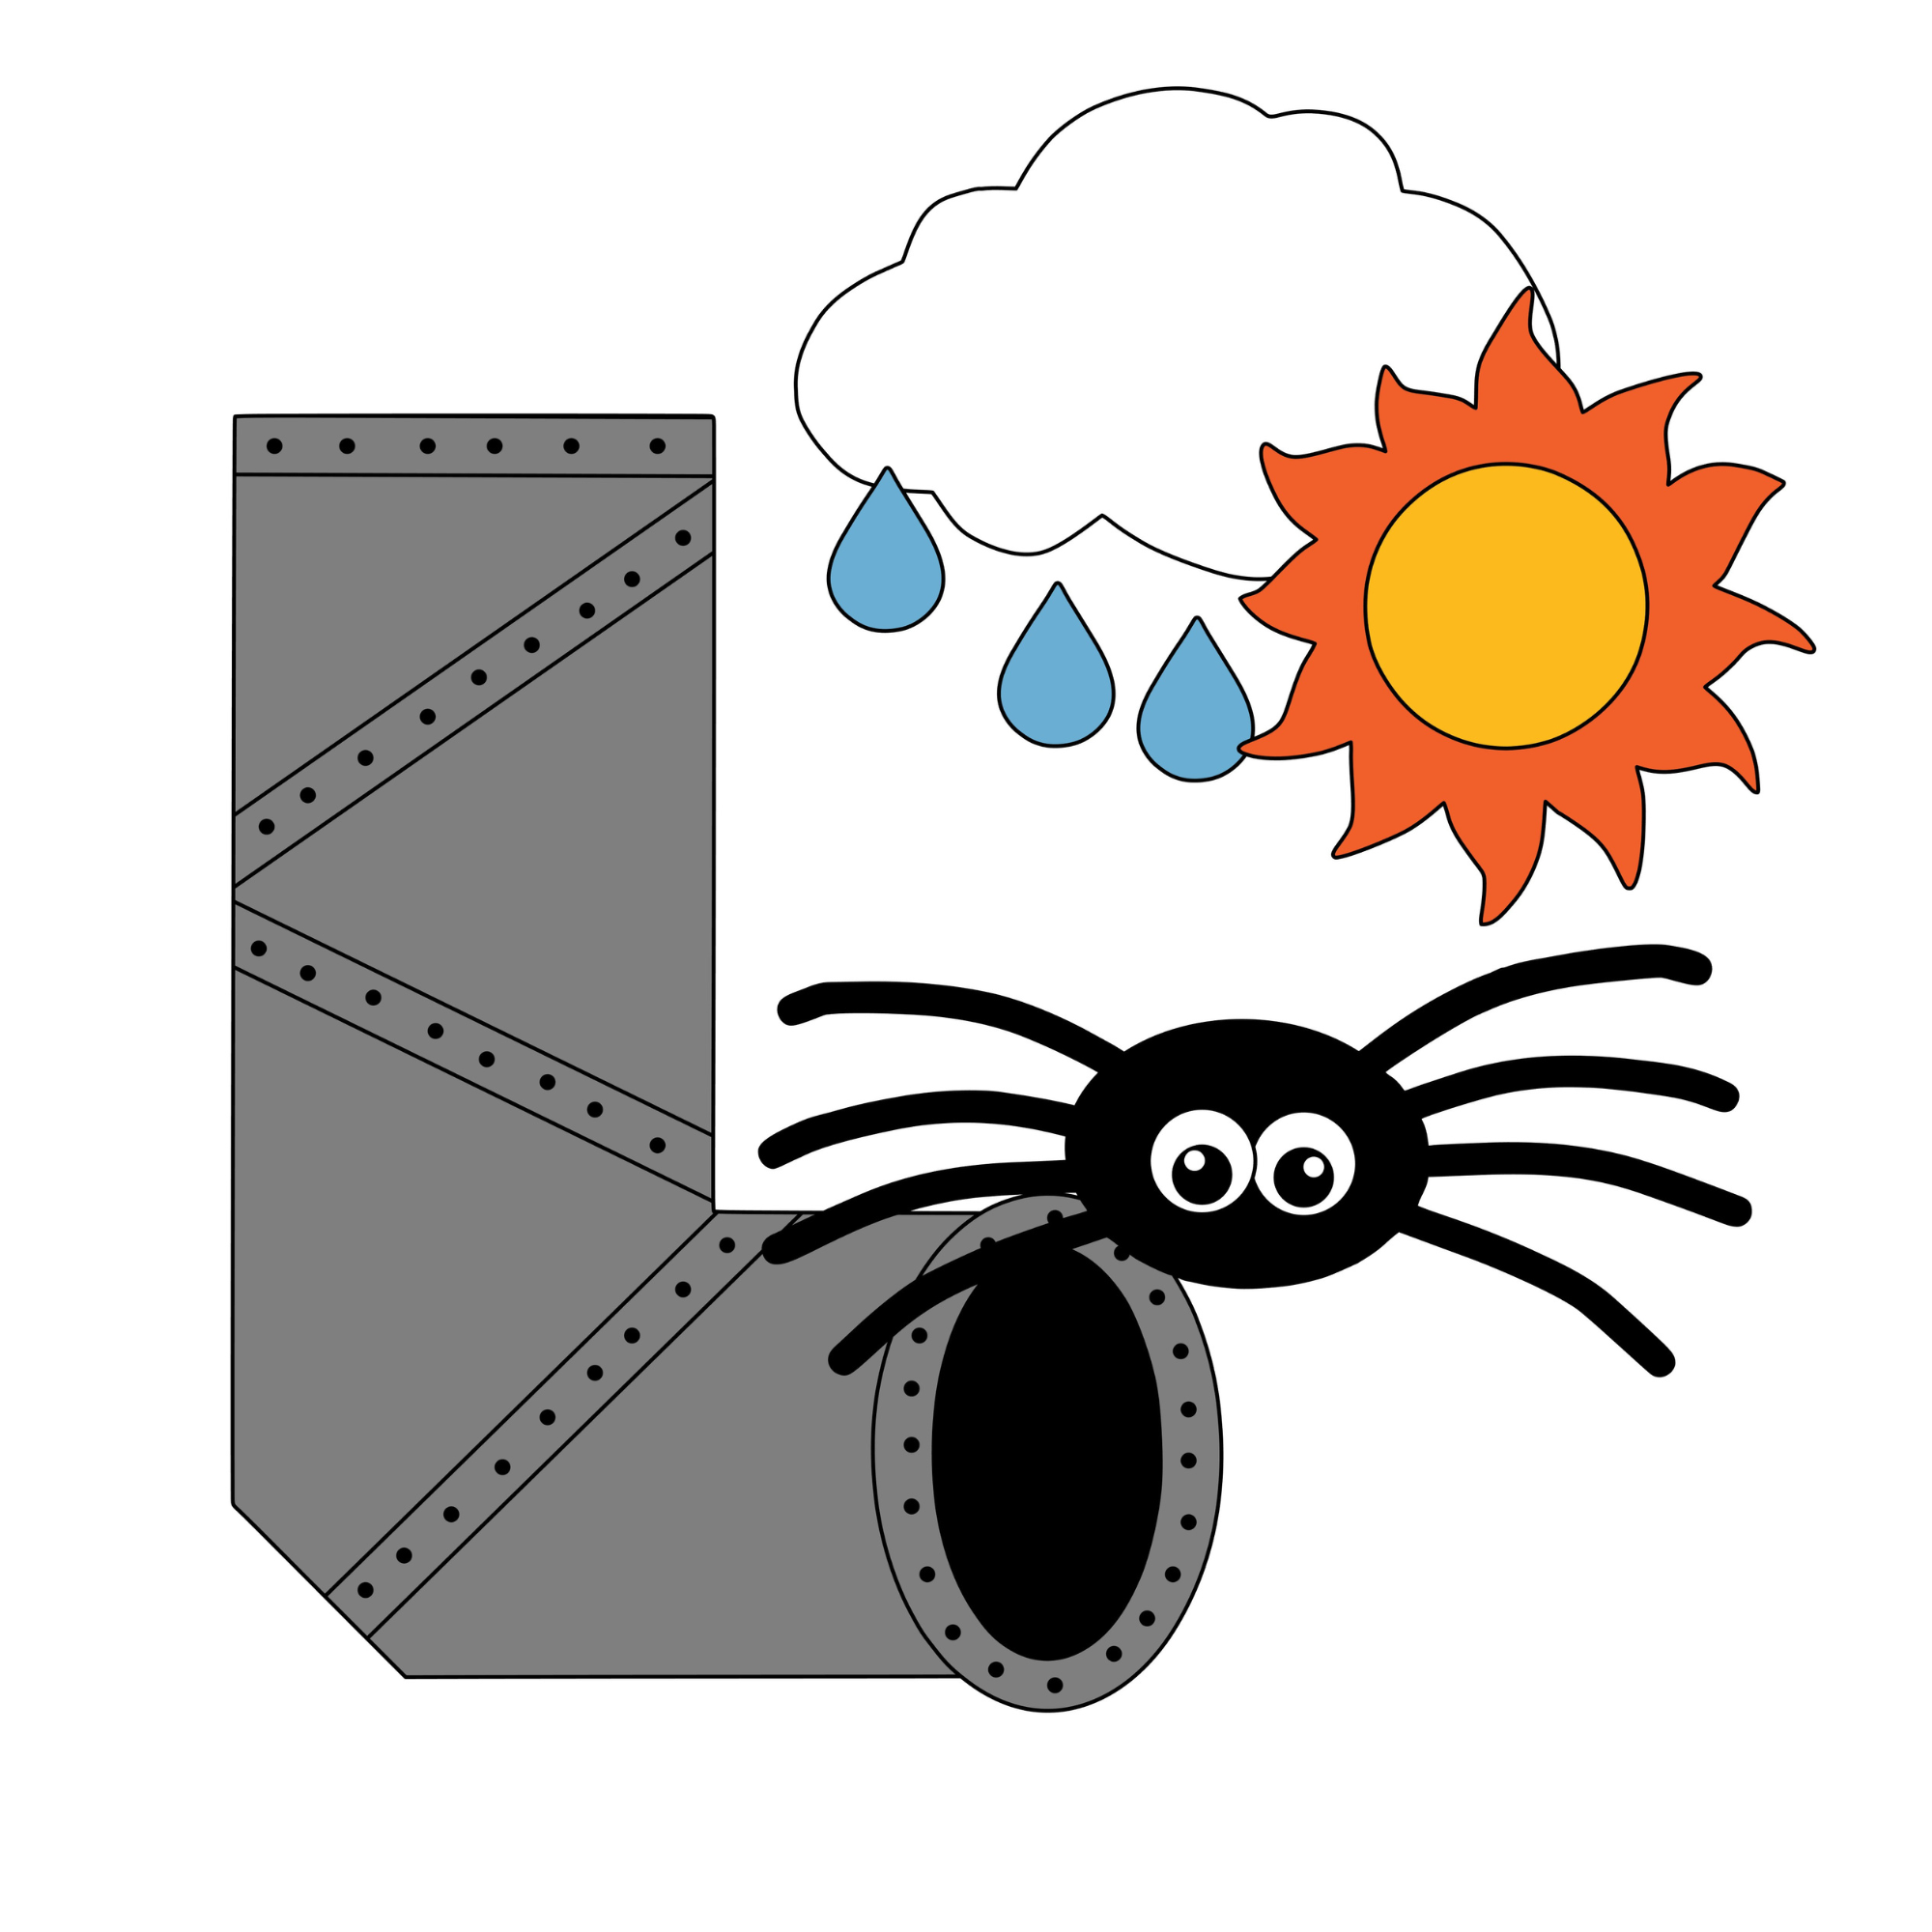 Incy Wincy Itsy Bitsy Spider Activities and Resources - The